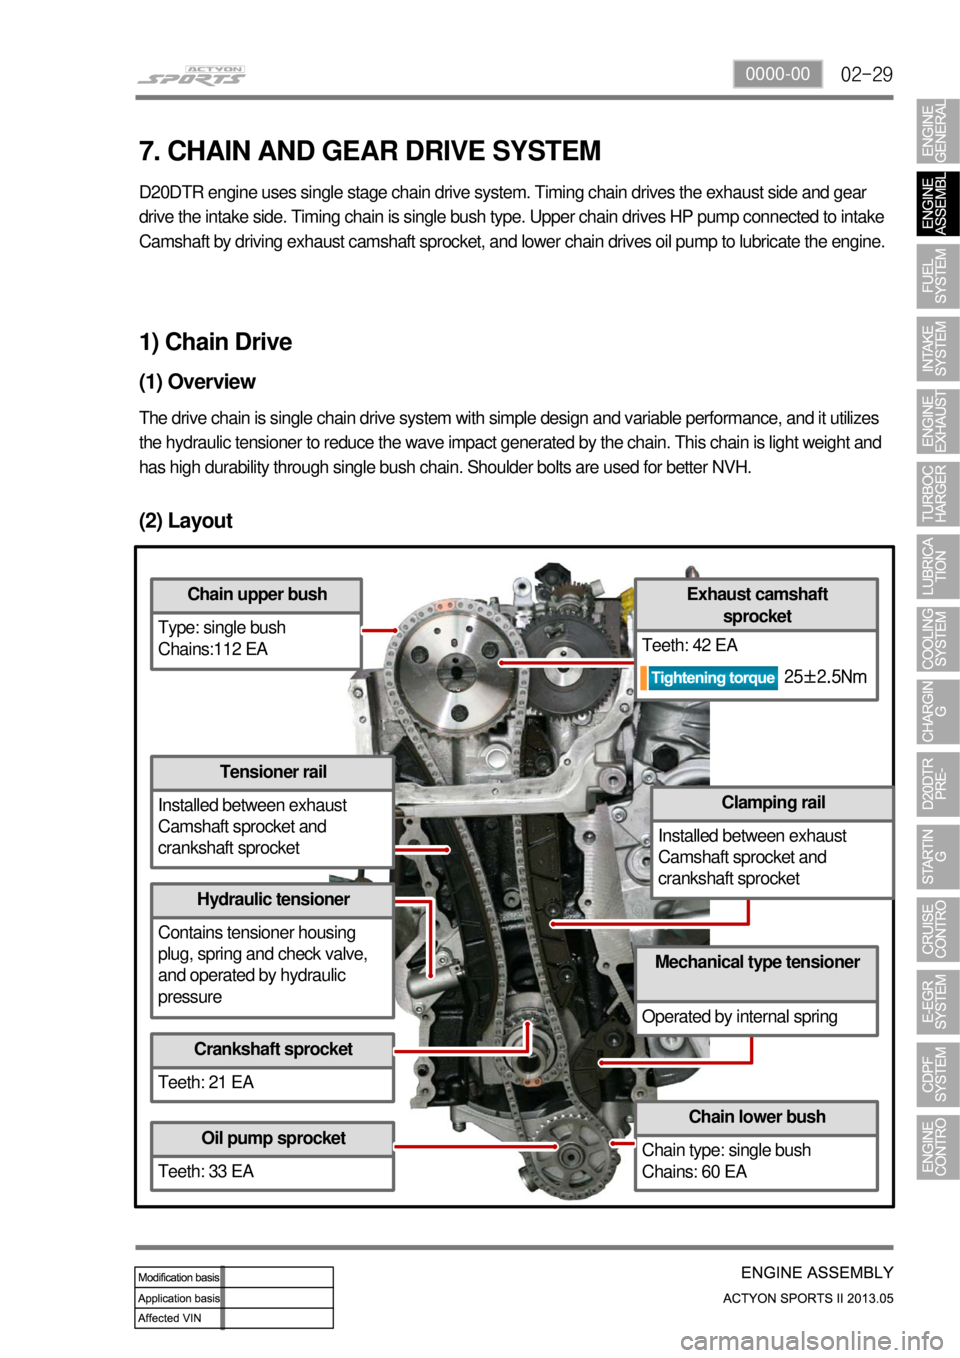 SSANGYONG NEW ACTYON SPORTS 2013  Service Manual 02-290000-00
(2) Layout
Chain upper bush
Type: single bush
Chains:112 EA
Tensioner rail
Installed between exhaust 
Camshaft sprocket and 
crankshaft sprocket
Hydraulic tensioner
Contains tensioner hou